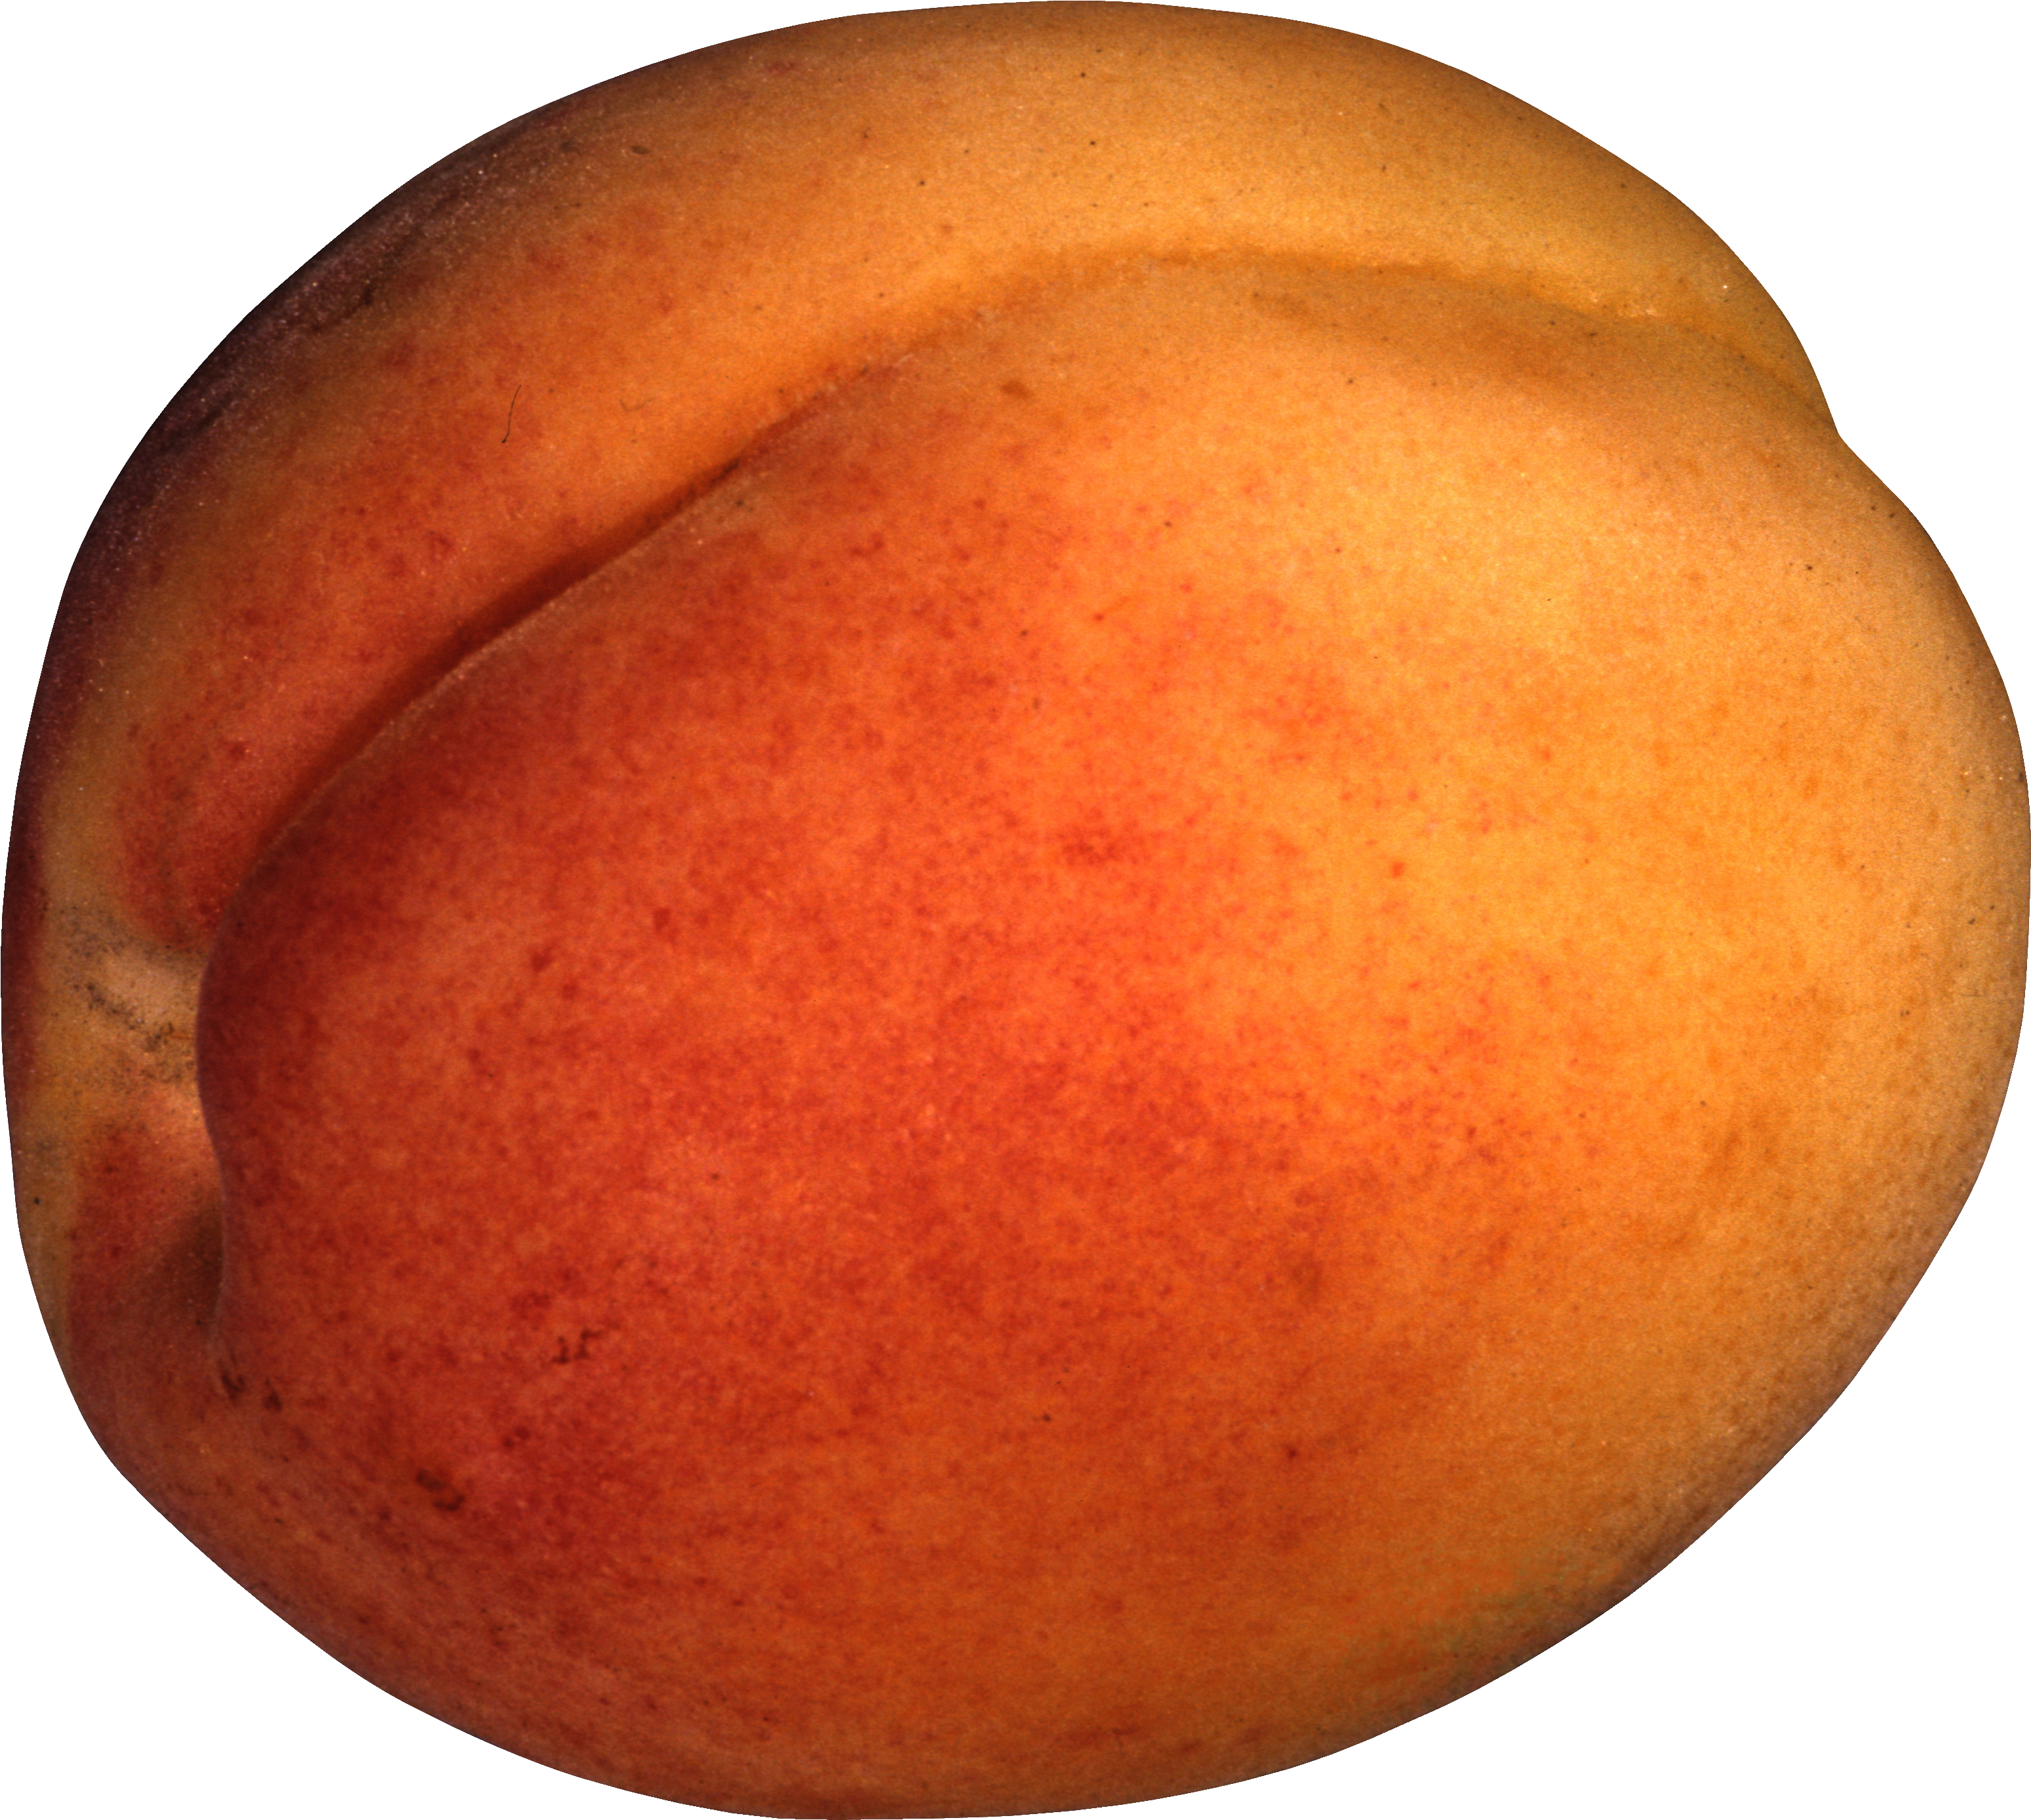 Large apricot PNG